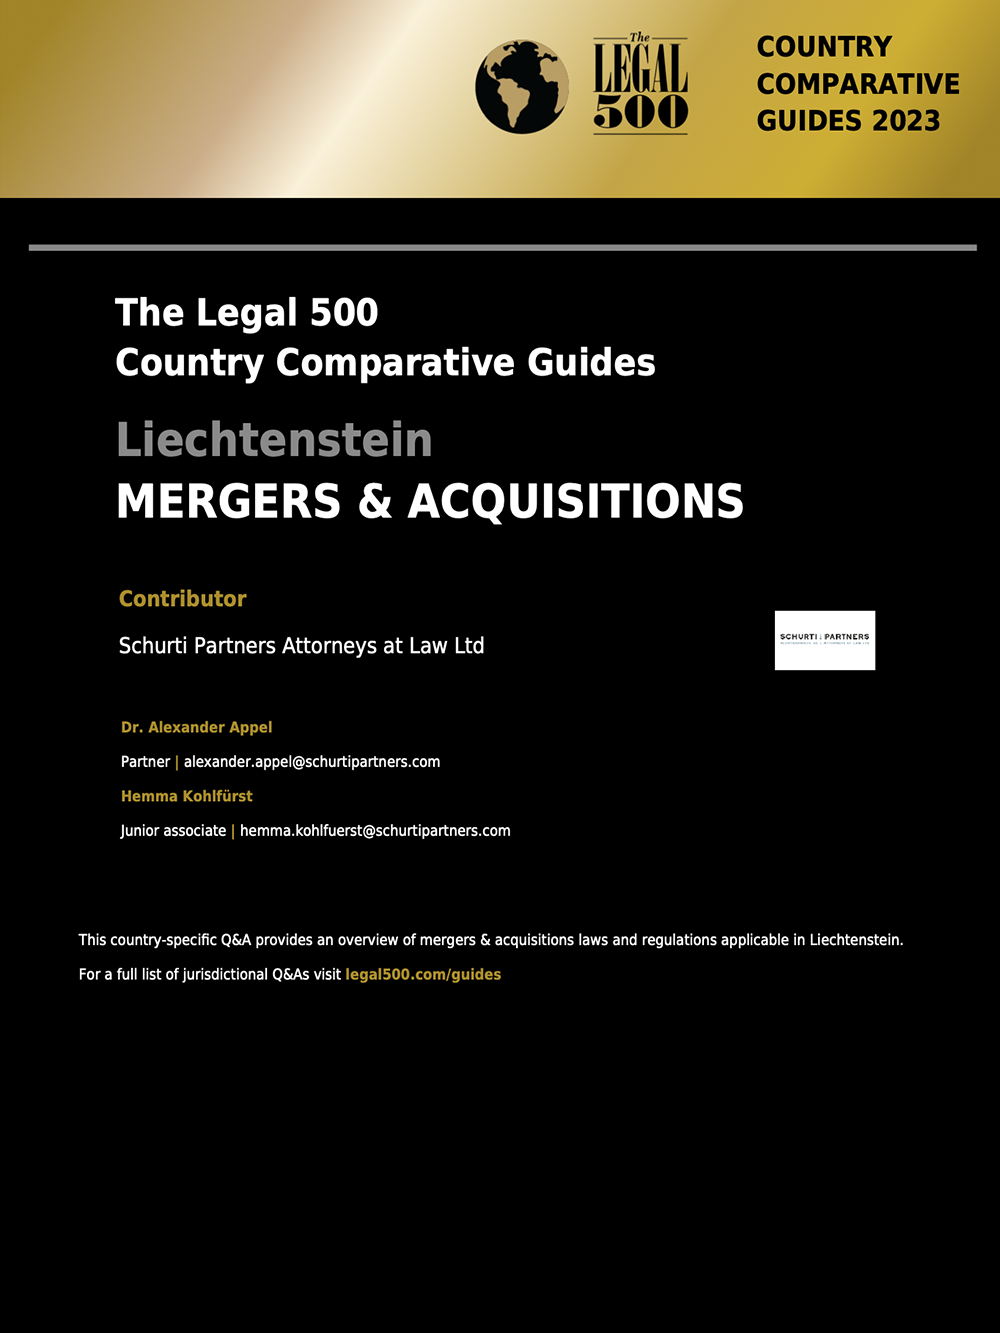 The Legal 500 | Mergers & Acquisitions 2023